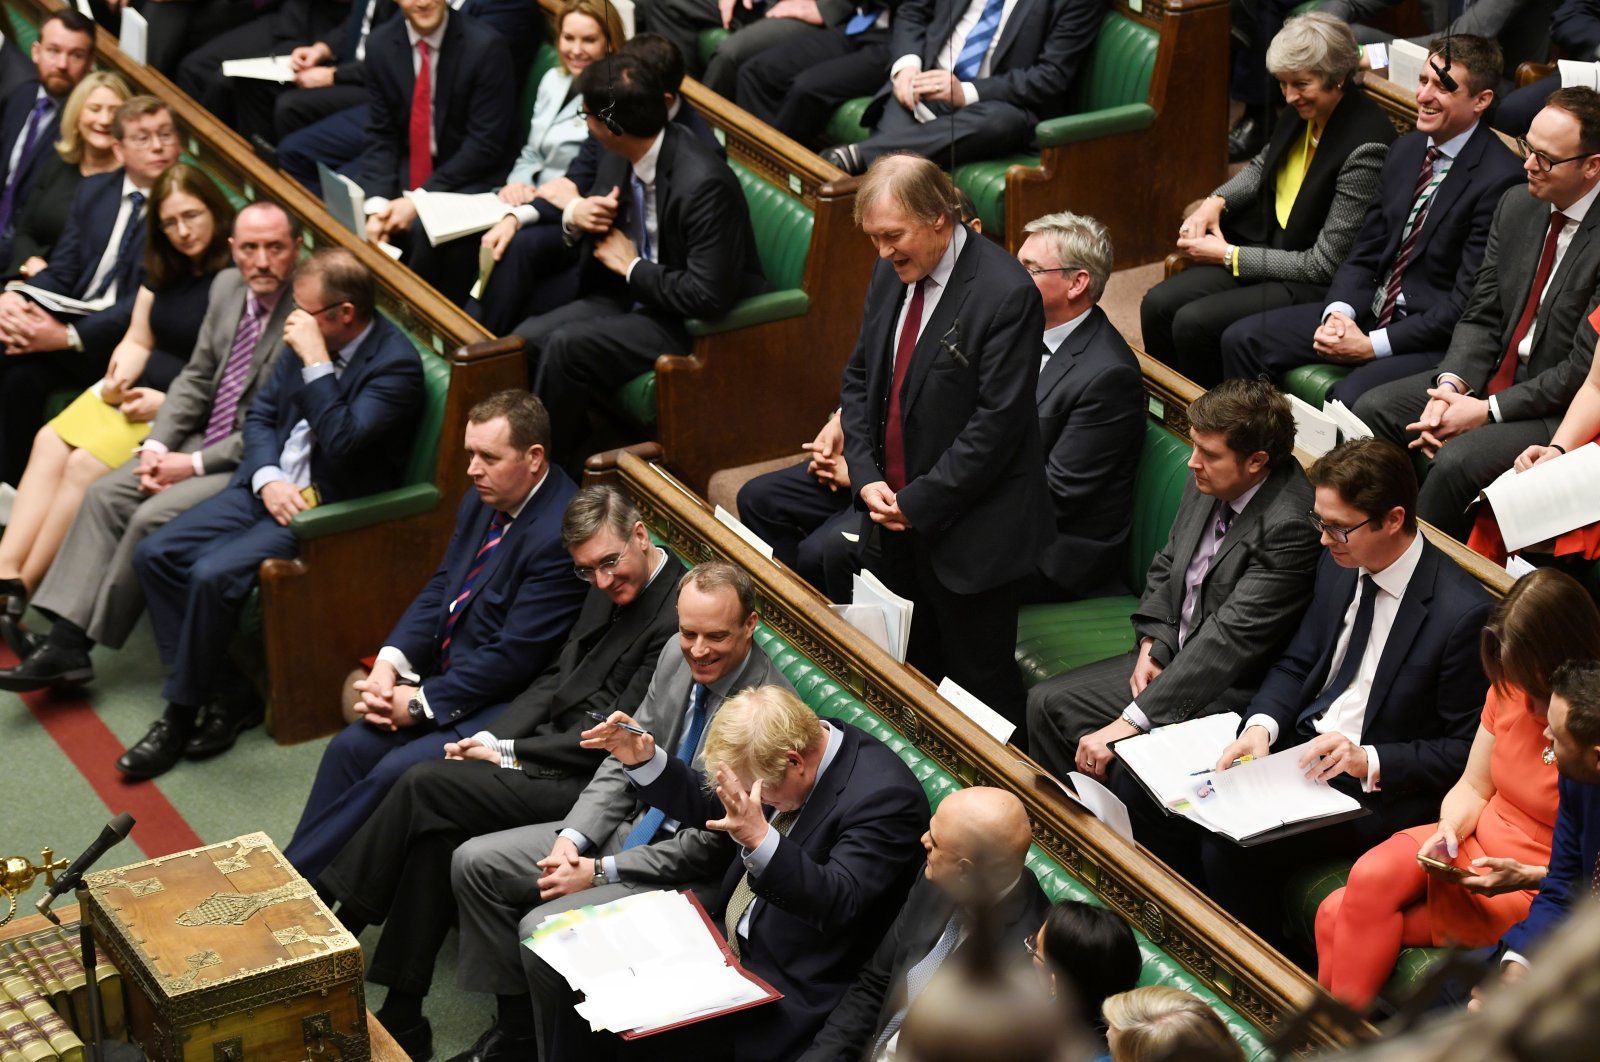 Britain's MP Sir David Amess attends a Prime Minister's Questions session in the House of Commons, in London, Britain Jan. 15, 2020. (Reuters Photo)